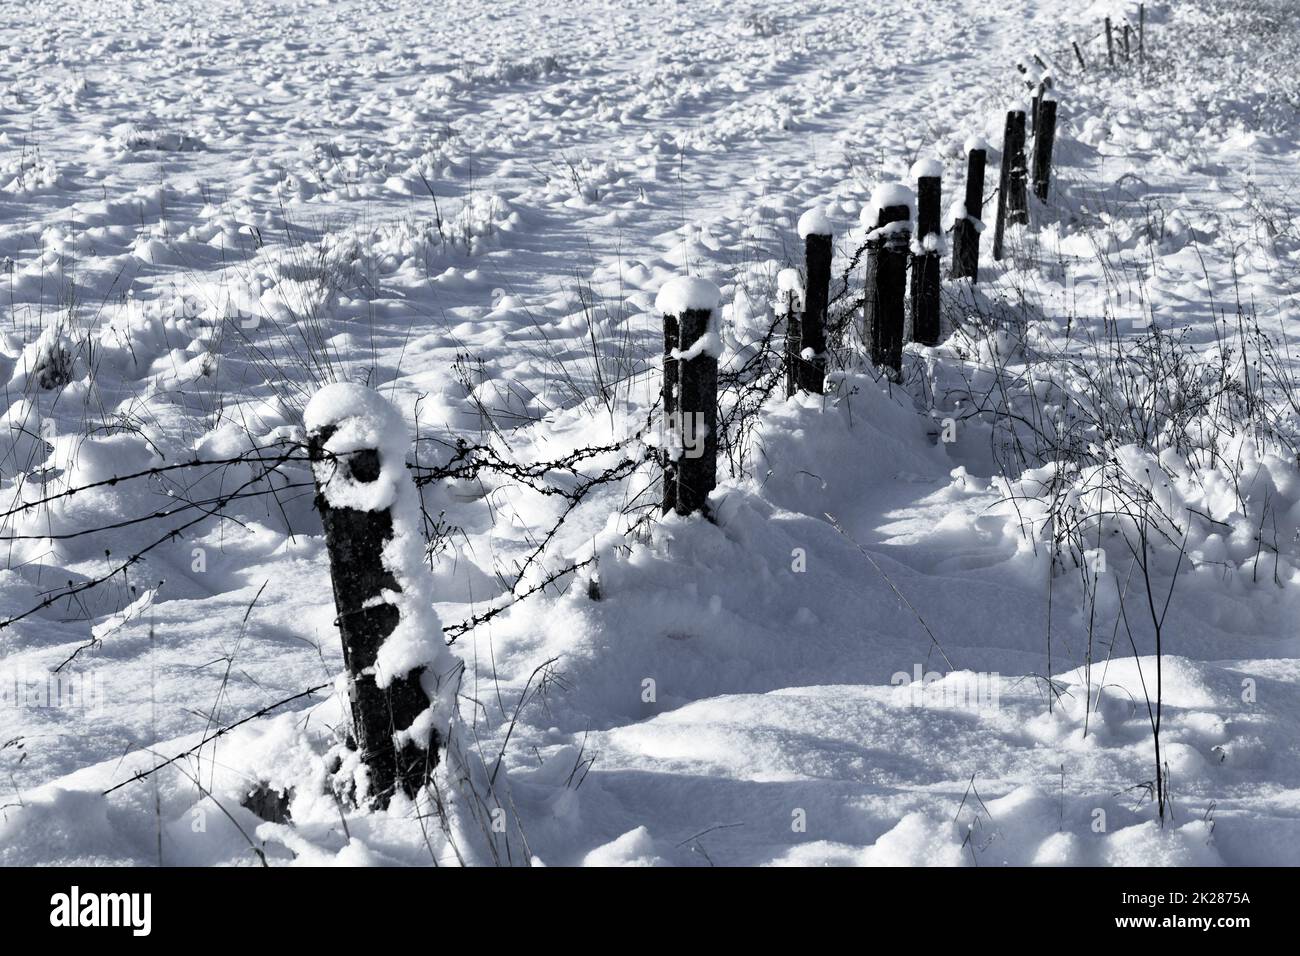 Barbed wire fence with snow Stock Photo